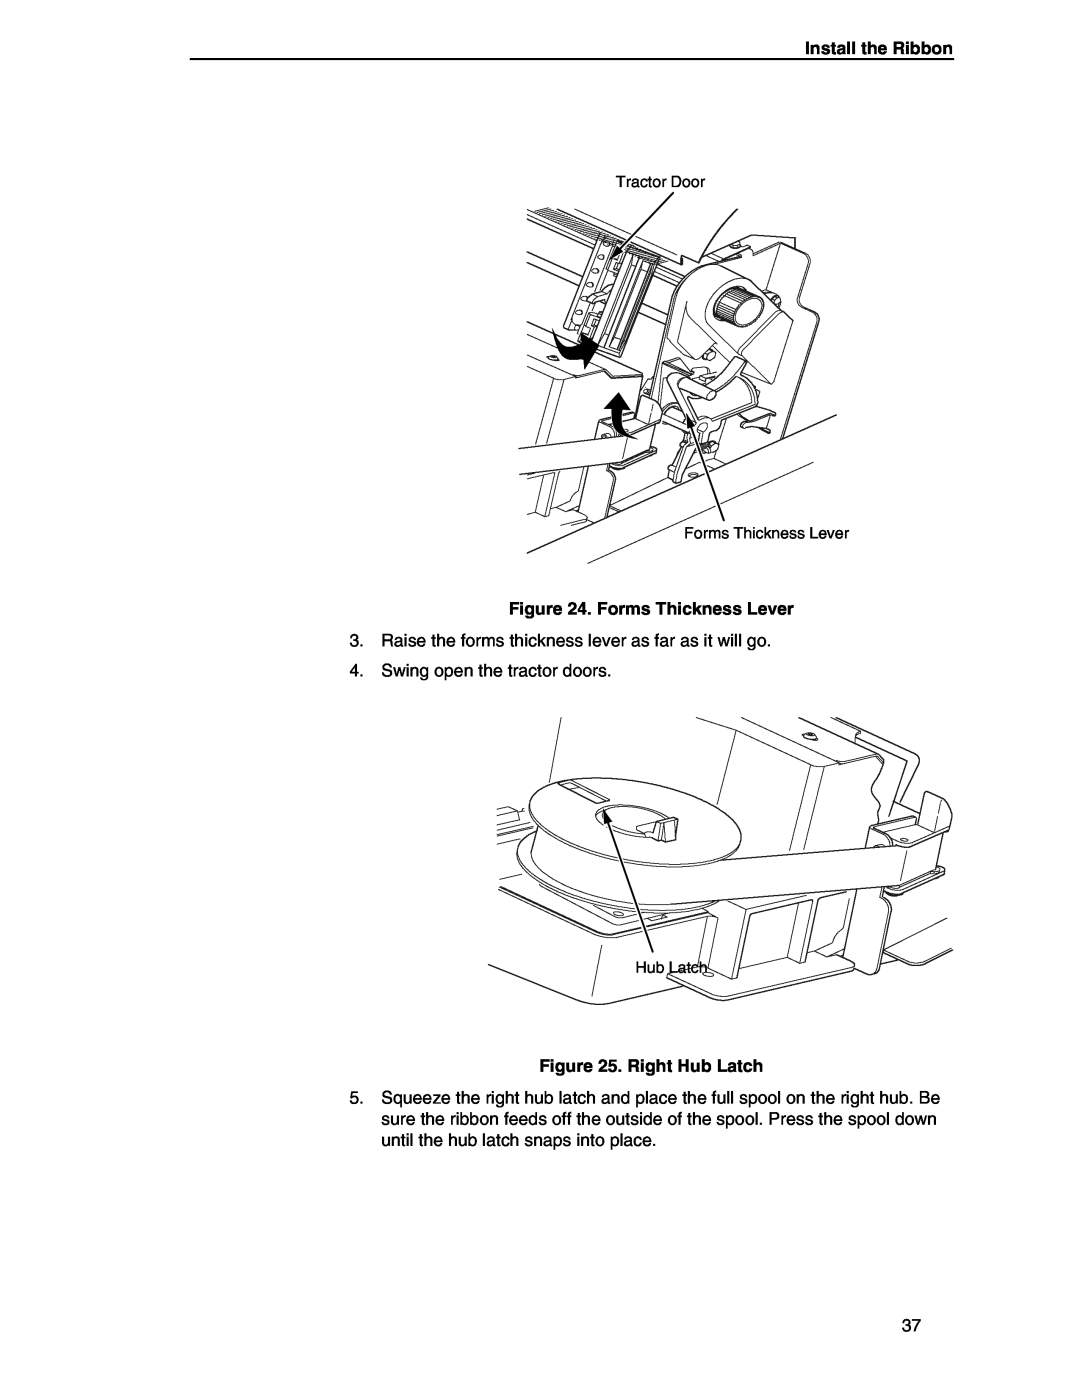 Compaq P5000 Series setup guide Install the Ribbon, Forms Thickness Lever, Right Hub Latch, Swing open the tractor doors 